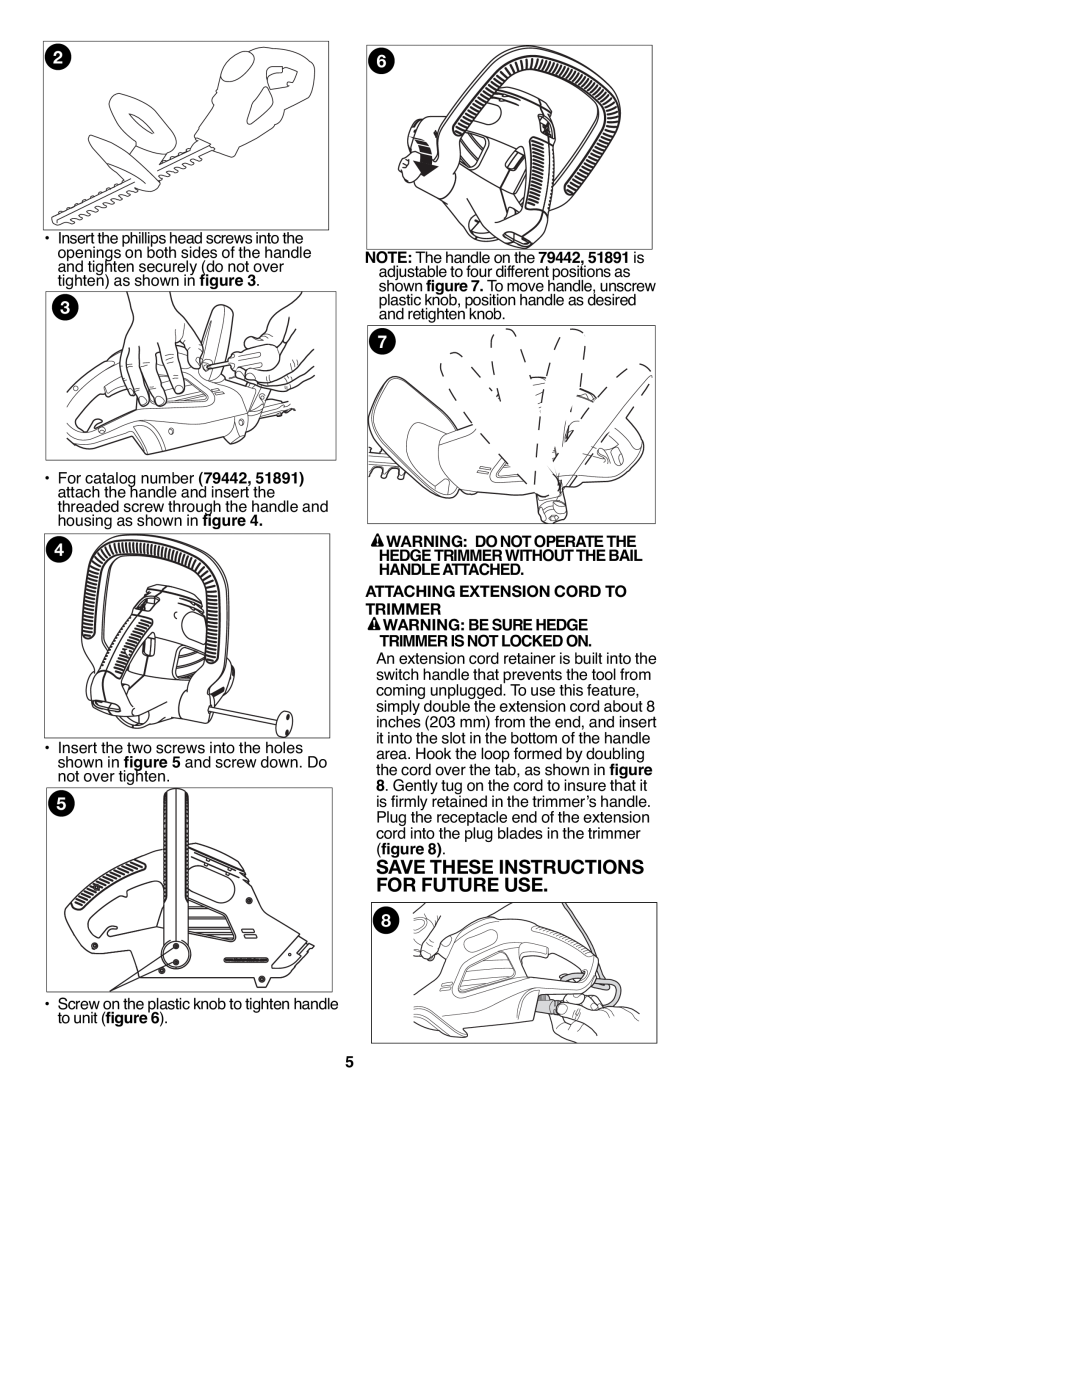 Sears 900.79442, 900.79441, C935.51891 manual Attaching Extension Cord To Trimmer, Save These Instructions For Future Use 